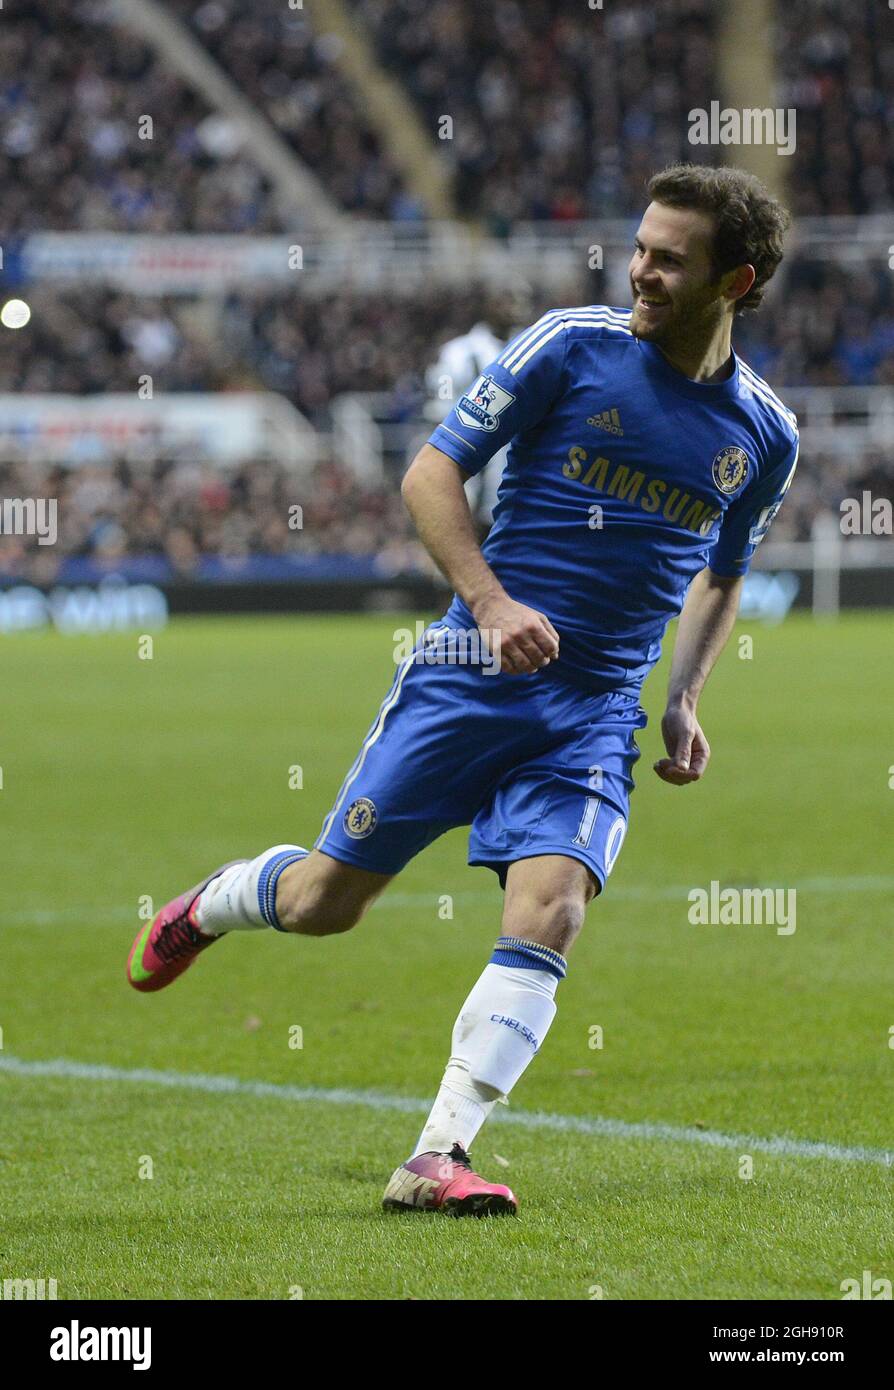 Juan Mata of Chelsea celebrates scoring their second goal during the Barclays Premier League soccer match between Newcastle Utd and Chelsea at St. James' Park in Newcastle, United Kingdom on February 02, 2013. Stock Photo